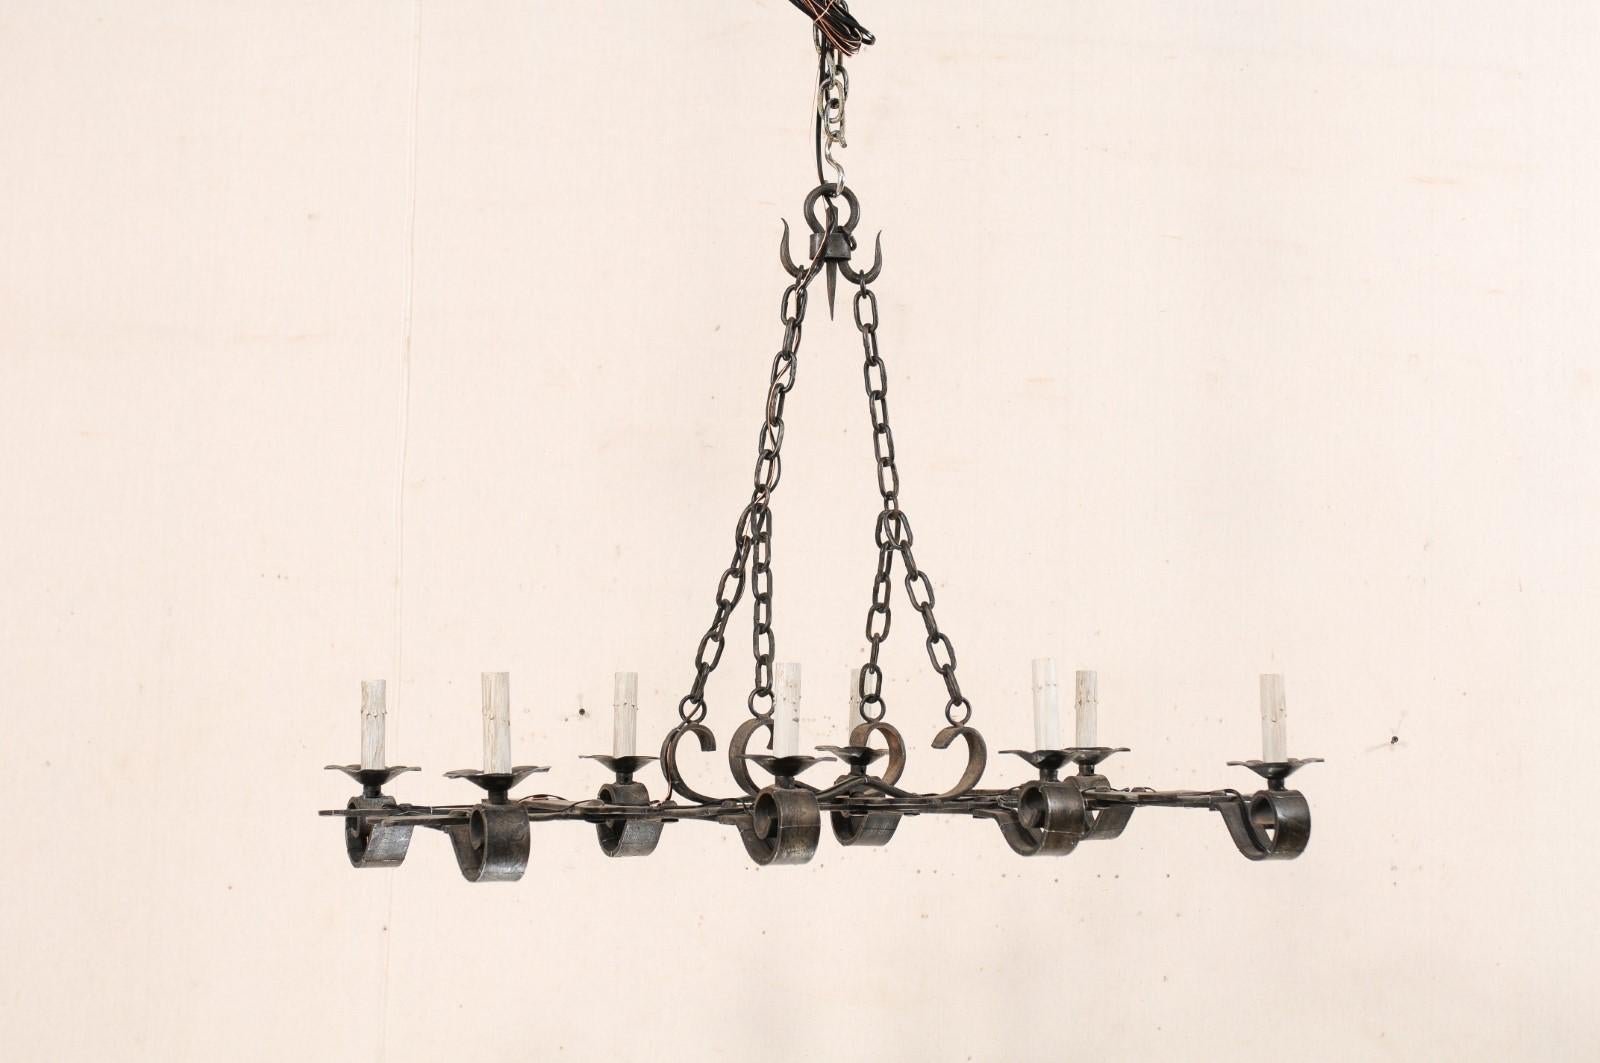 A French black forged-iron chandelier with eight-lights from the mid 20th century. This vintage chandelier from France has an overall rectangular-shape, with four cross-beams which support ruffled iron bobeches with painted candle sleeves sitting